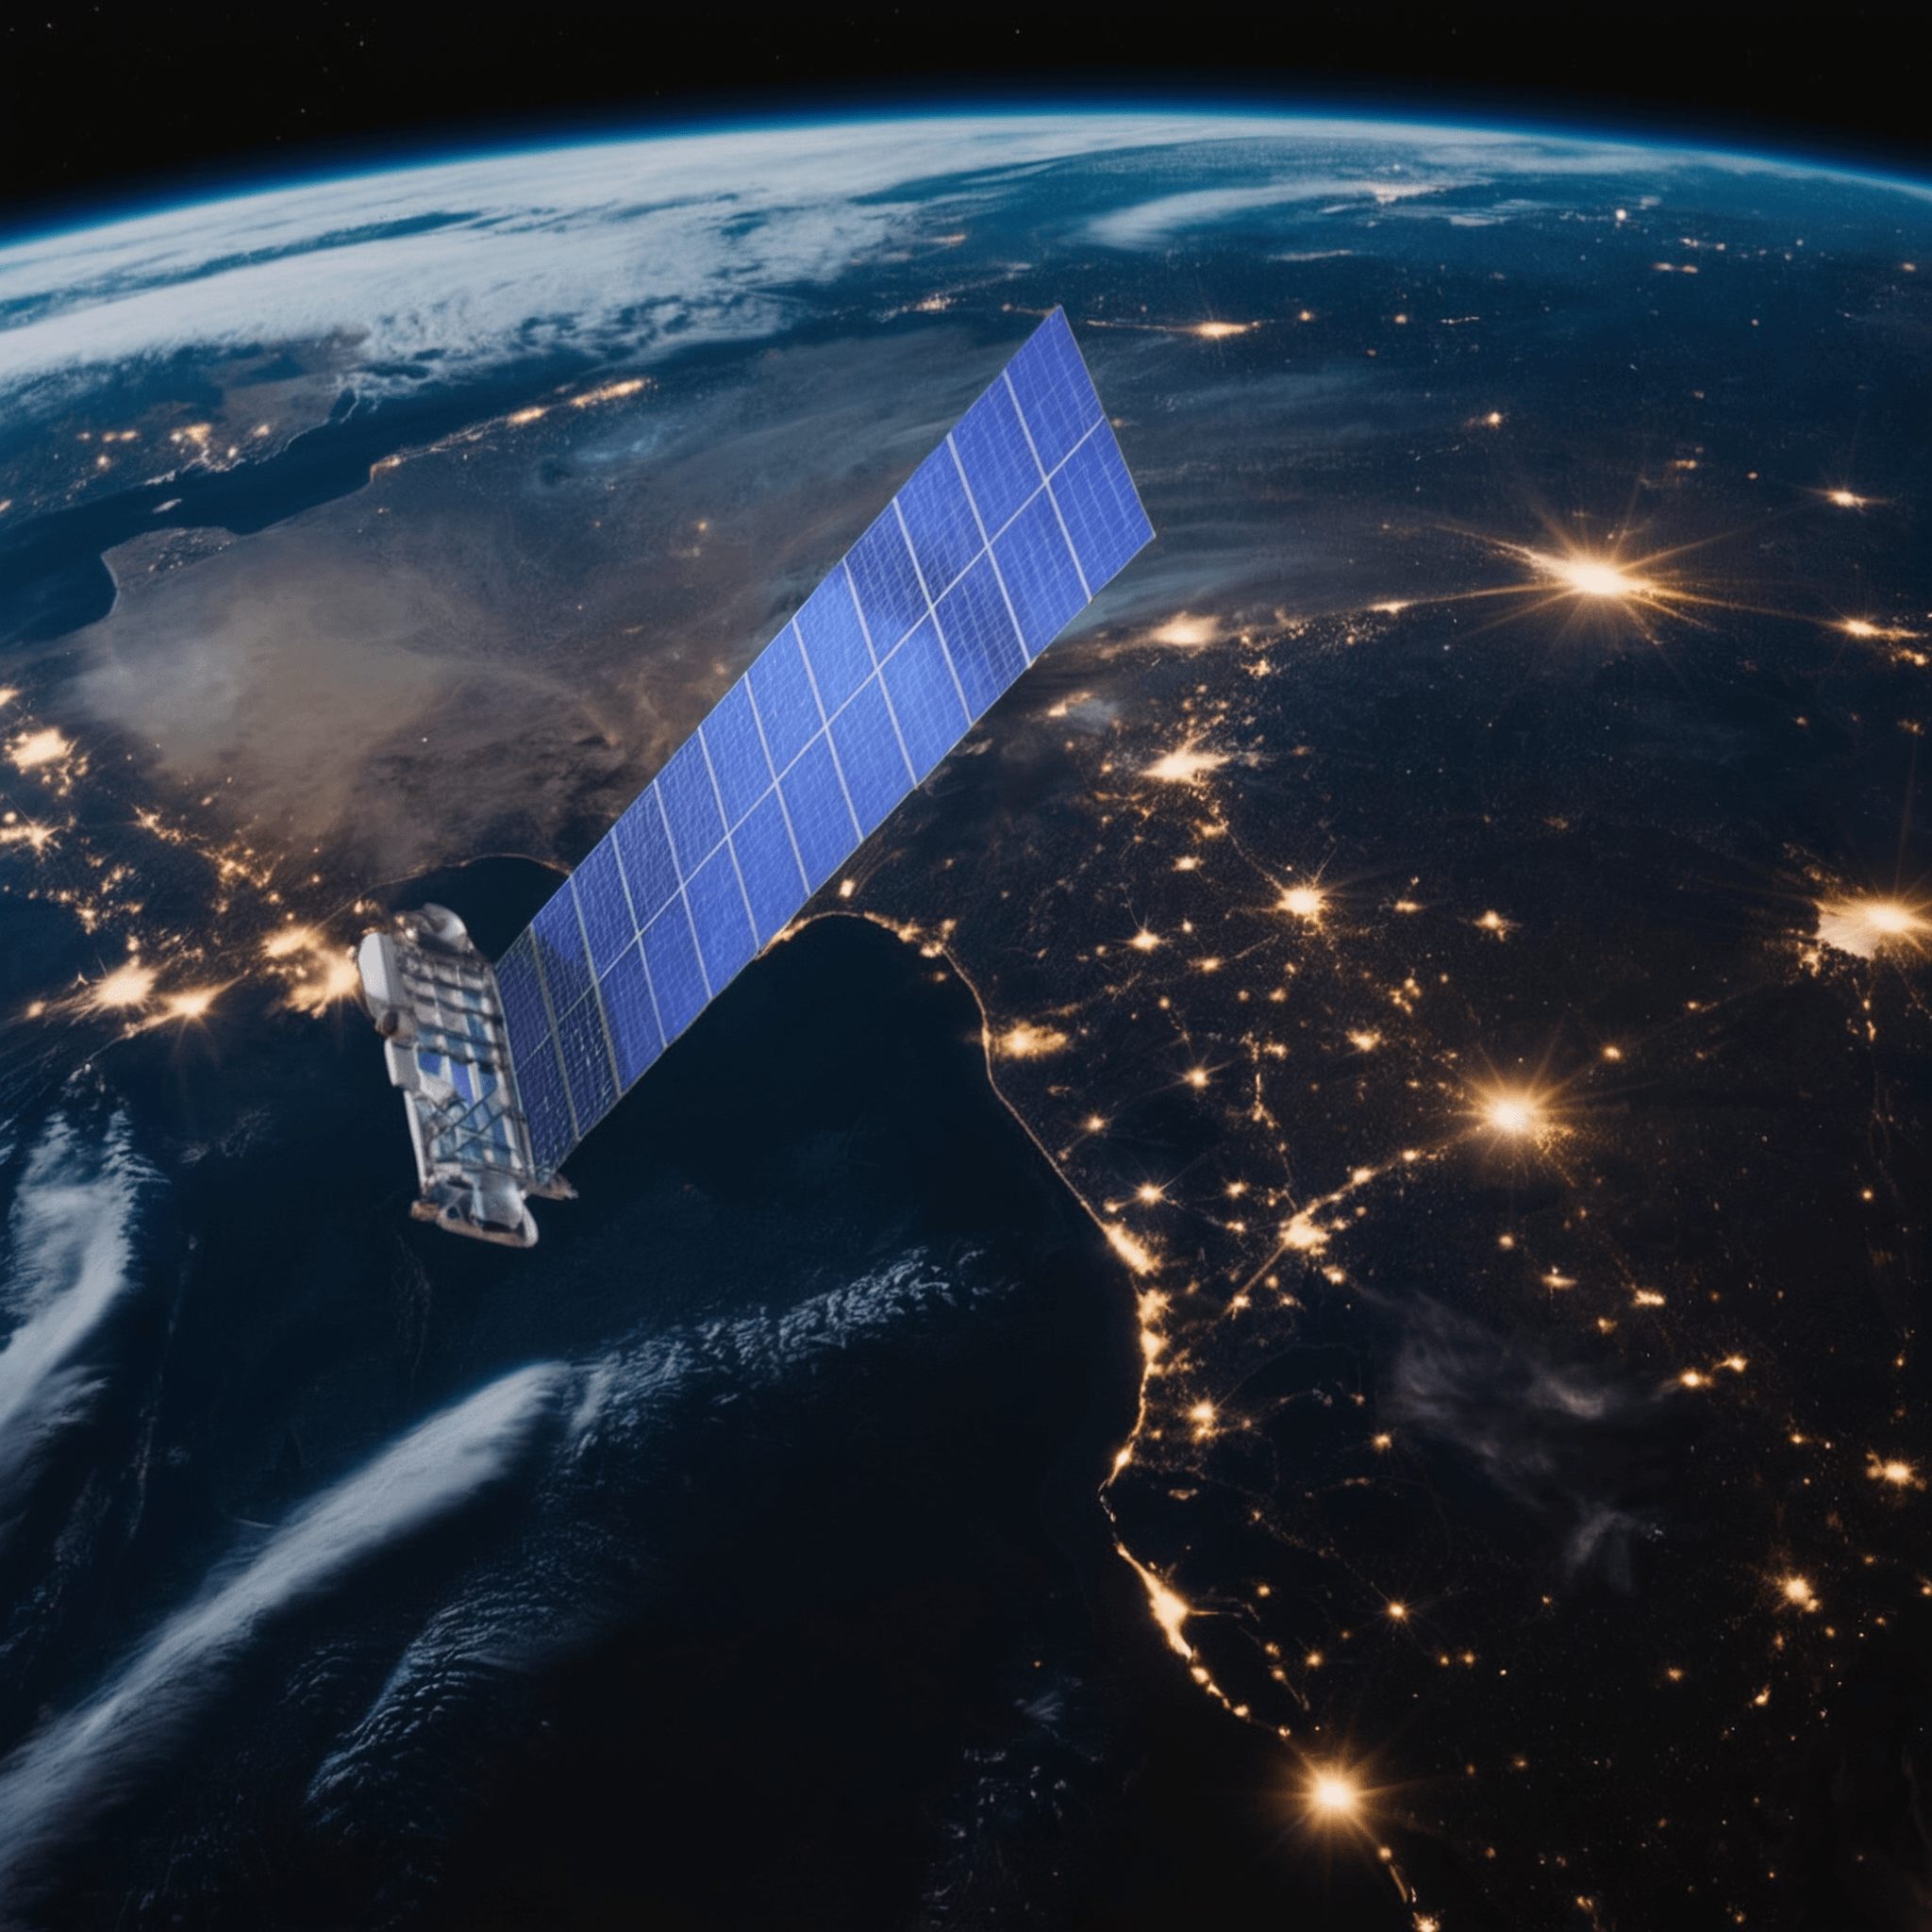 Amazon vs SpaceX: The Battle for the Best Satellite Internet Service